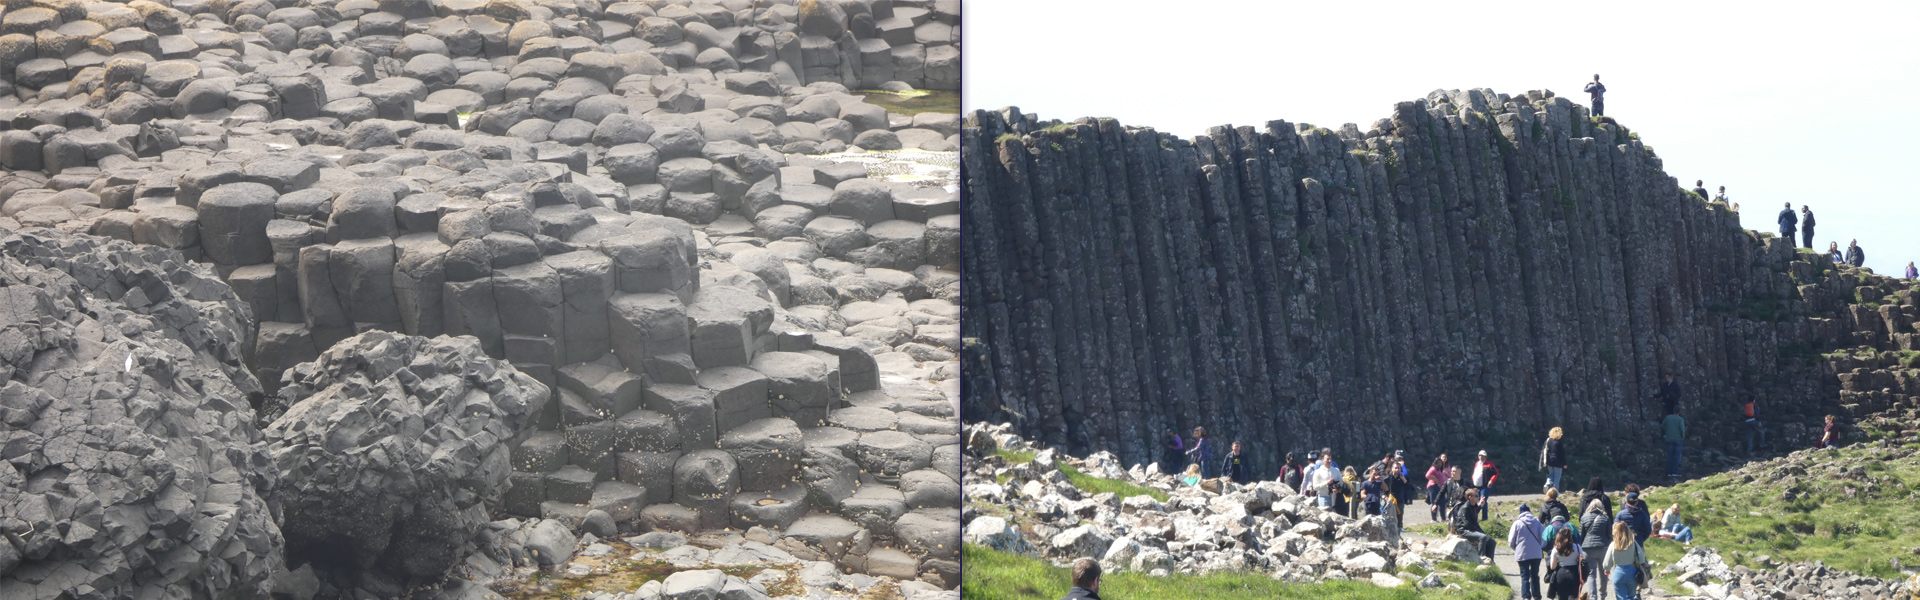 Two photos of the Giant's Causeway in Northern Ireland.